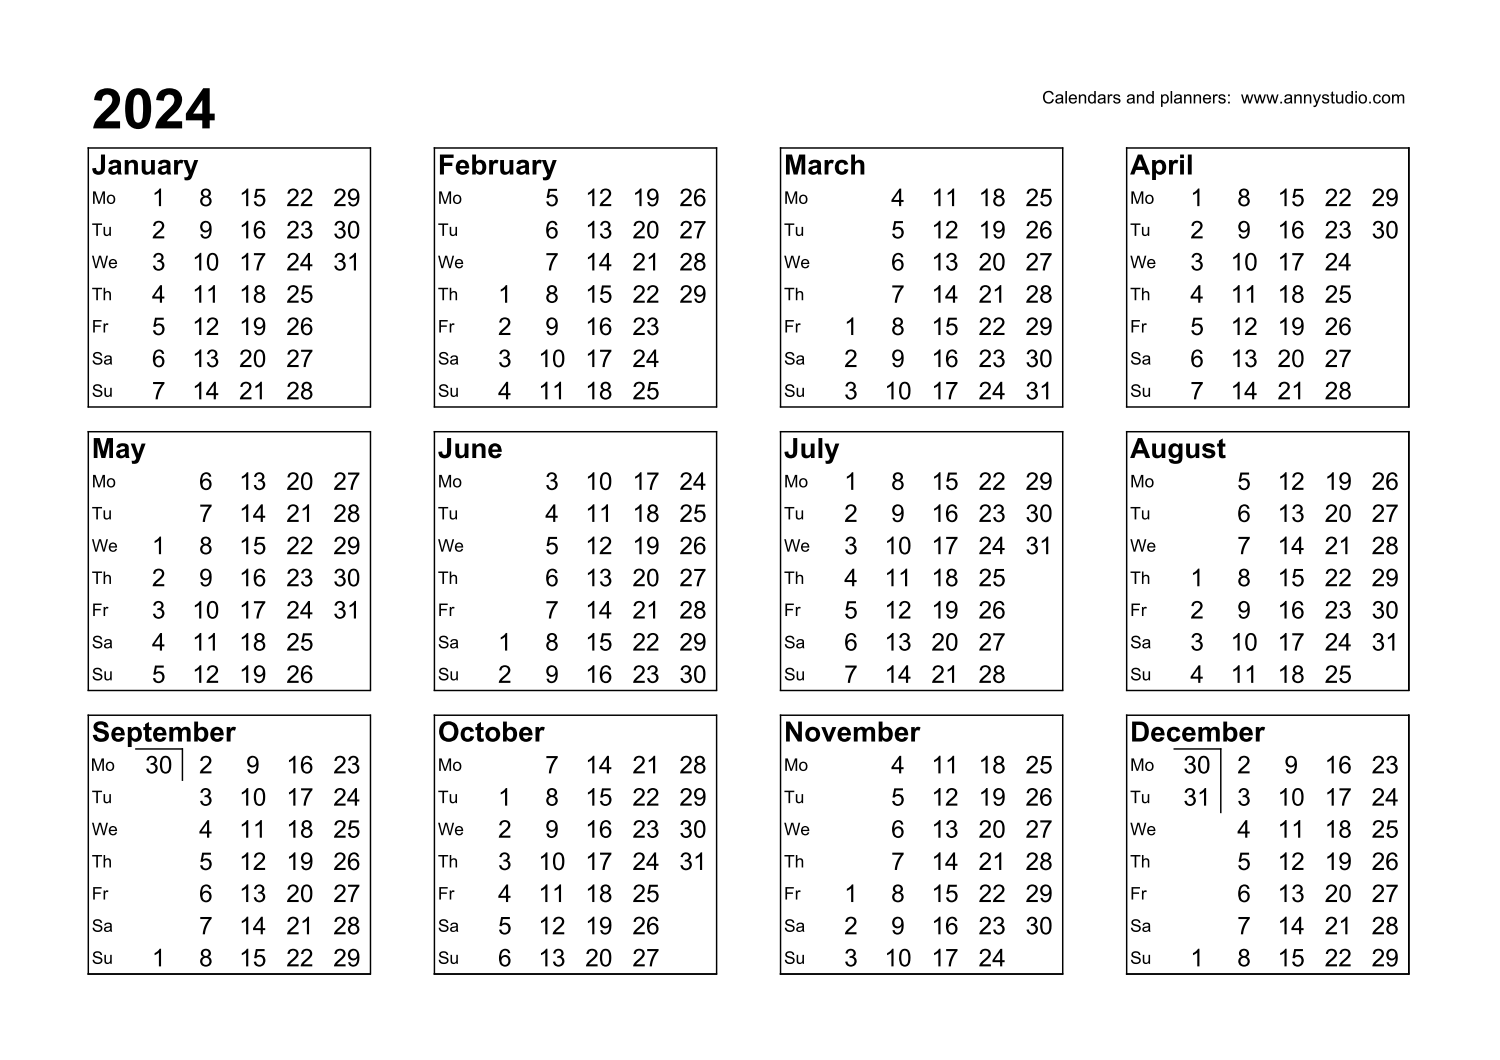 Free Printable Calendars And Planners 2024, 2025 And 2026 inside Free Printable Calendar 2024 A5